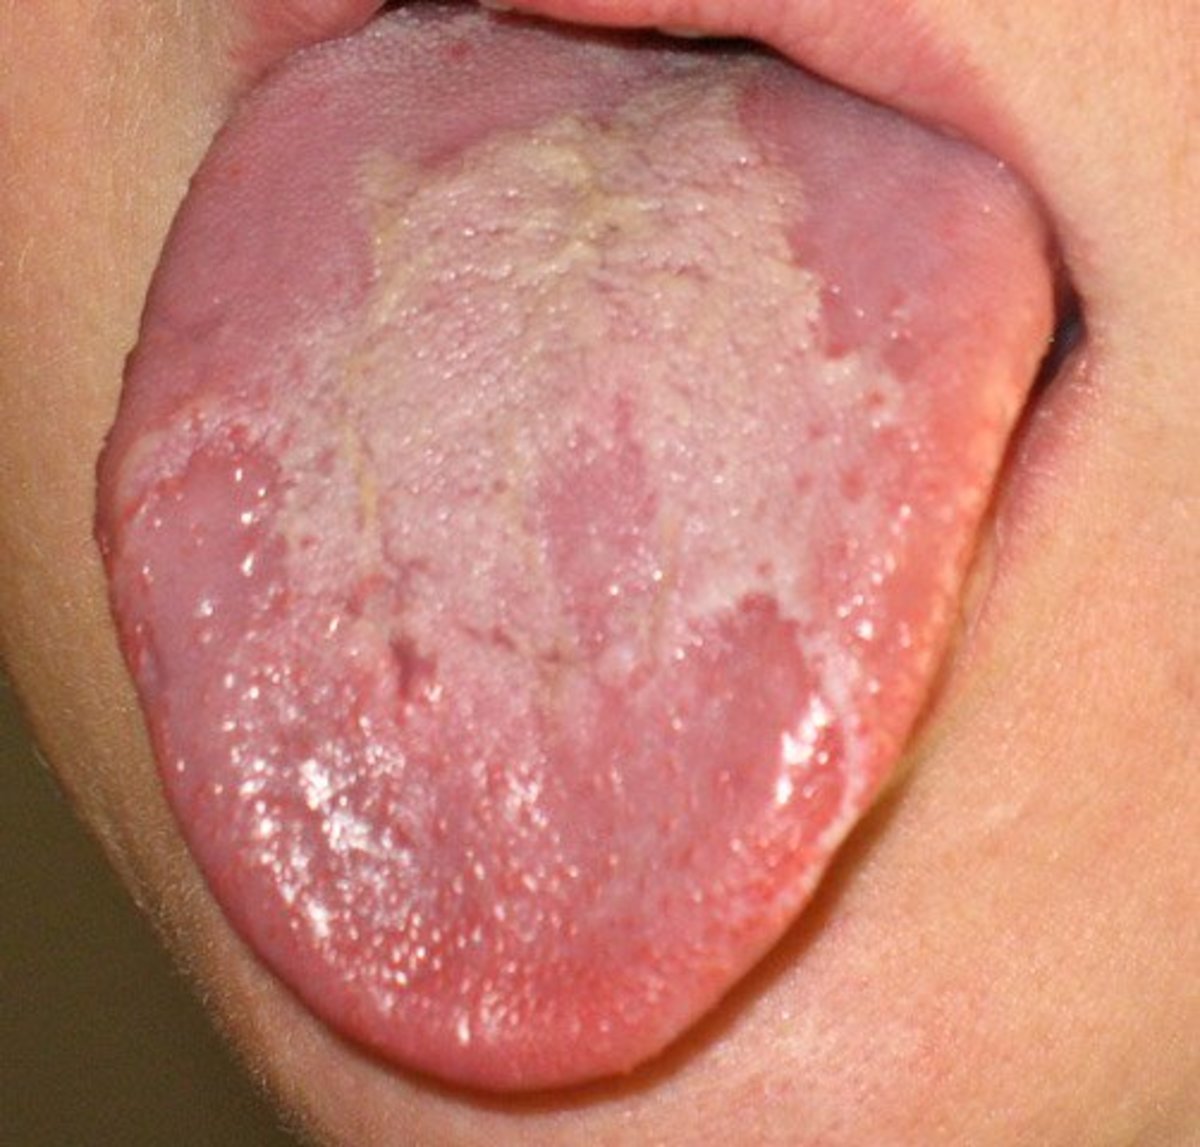 An image of a geographic tongue.